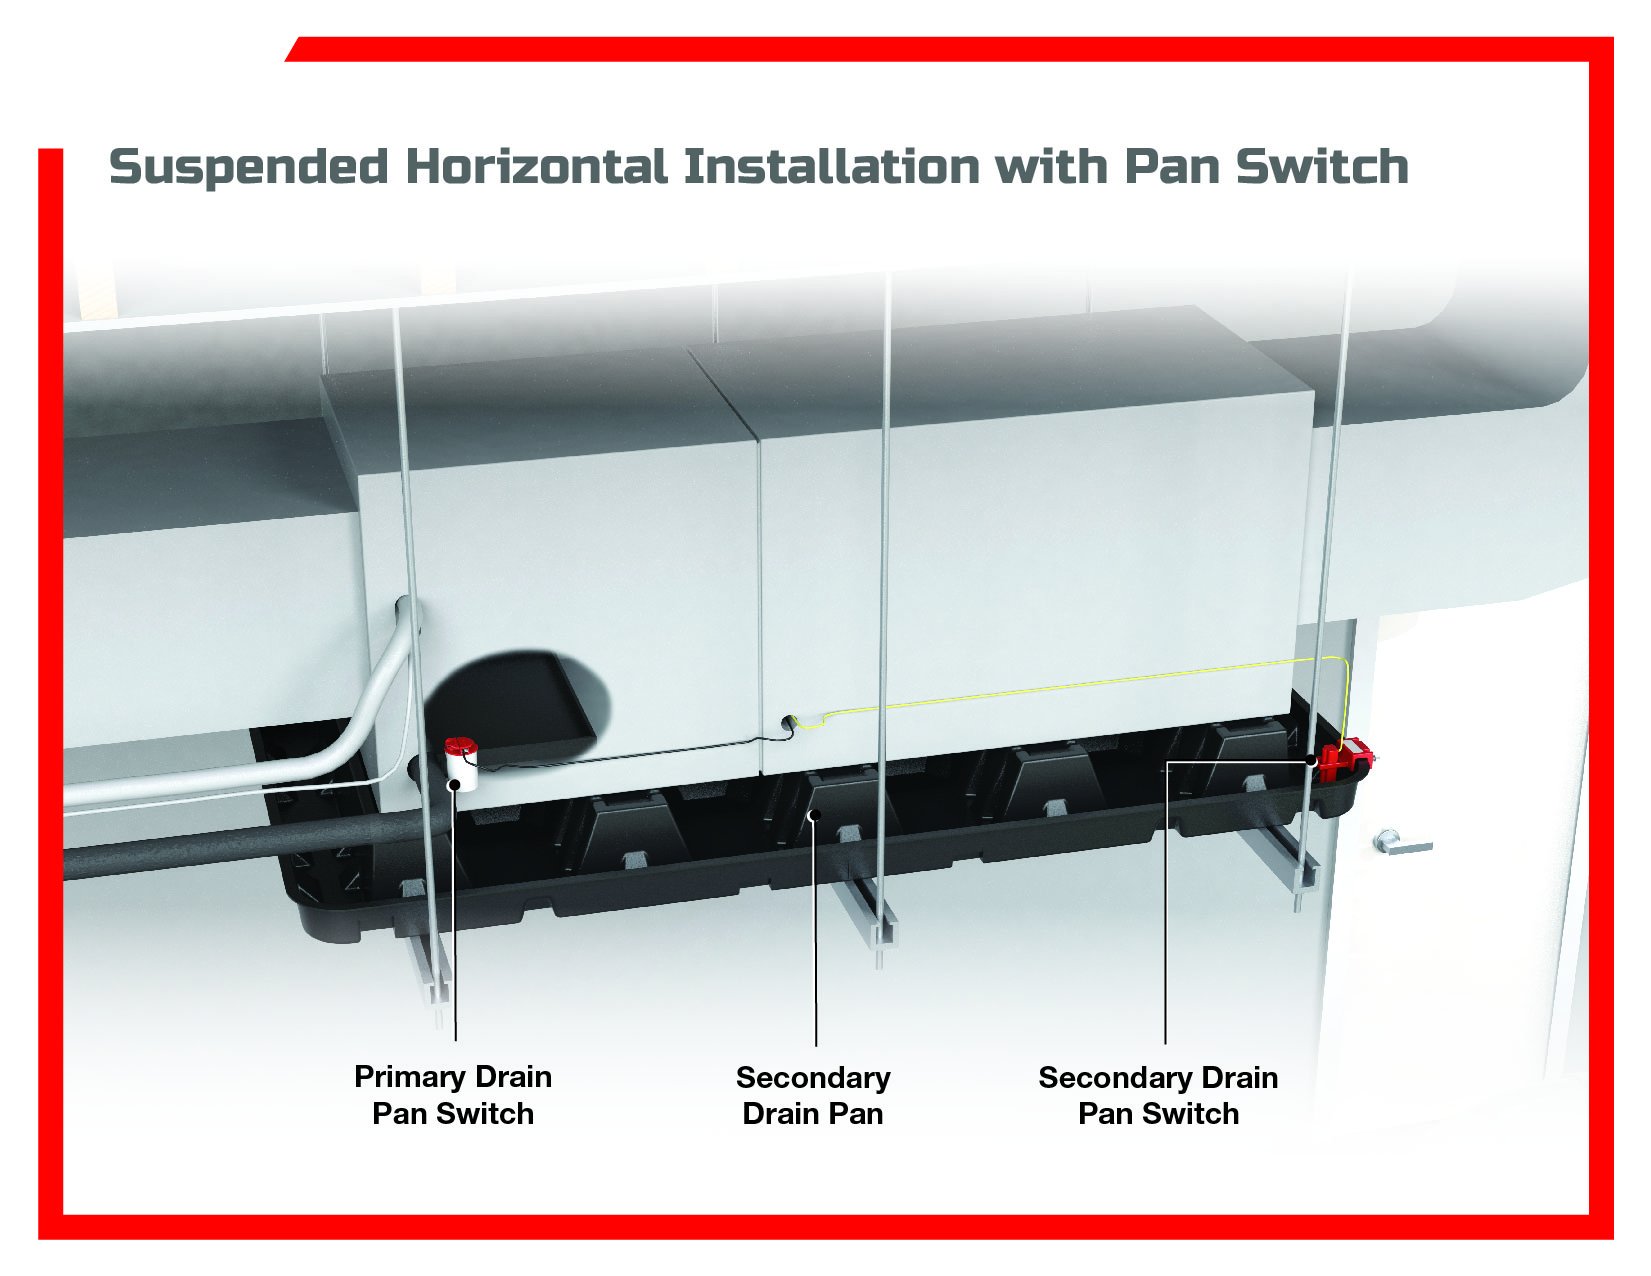 Suspended Horizontal Installation with Pan Switch